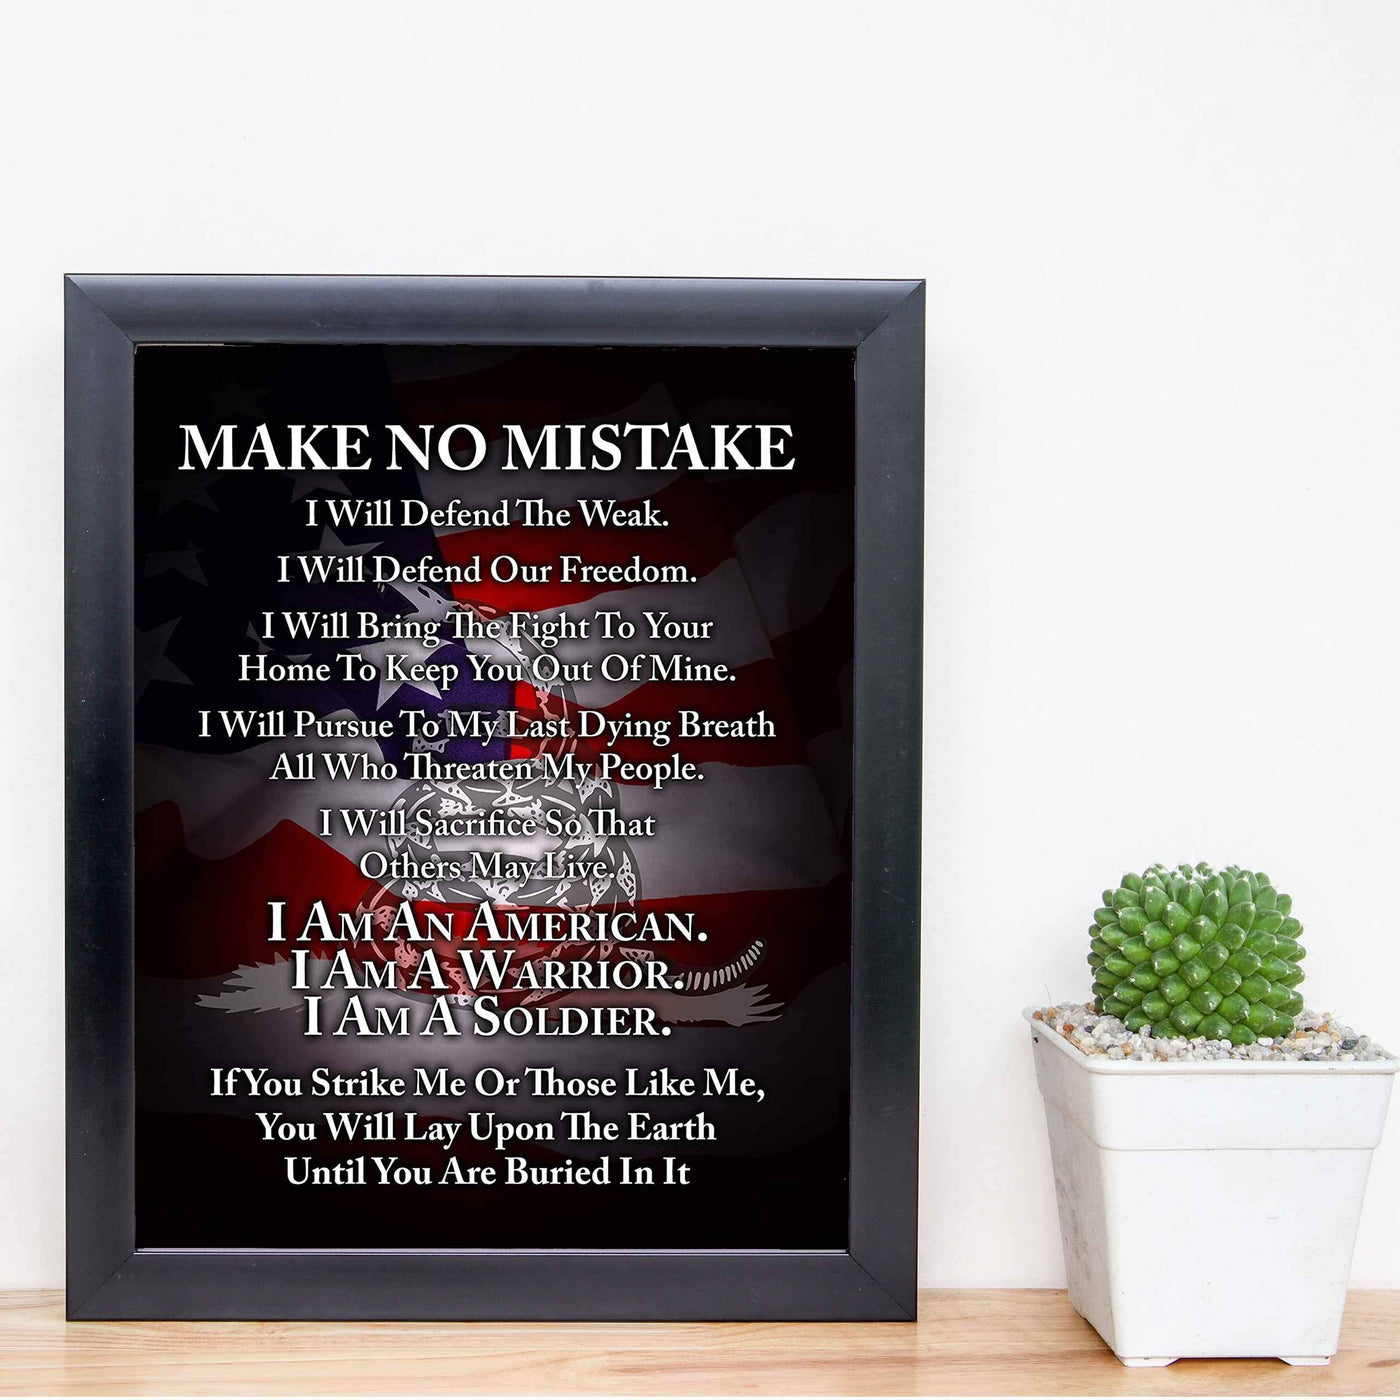 Make No Mistake-I Am A Soldier-I Will Defend-Patriotic Quotes Wall Art- 8 x 10" Pro-American Poster Print-Ready To Frame. Perfect Home-Office-Garage-Bar Decor. Great Gift for Military-Veterans!